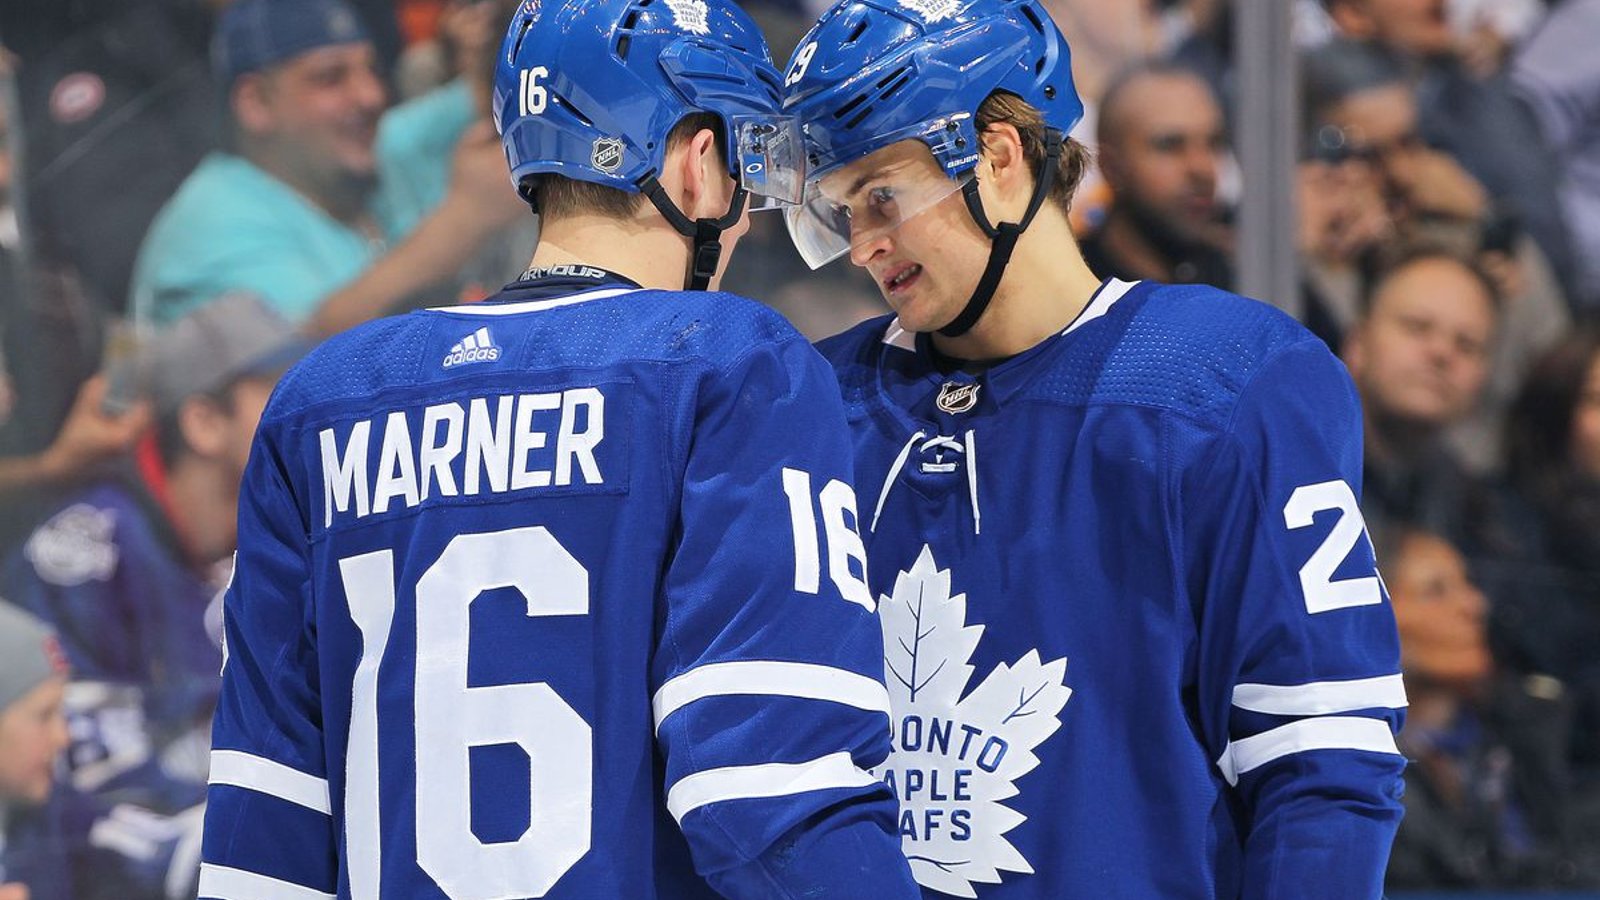 Marner walks out on Leafs: we know who convinced him to do it! 